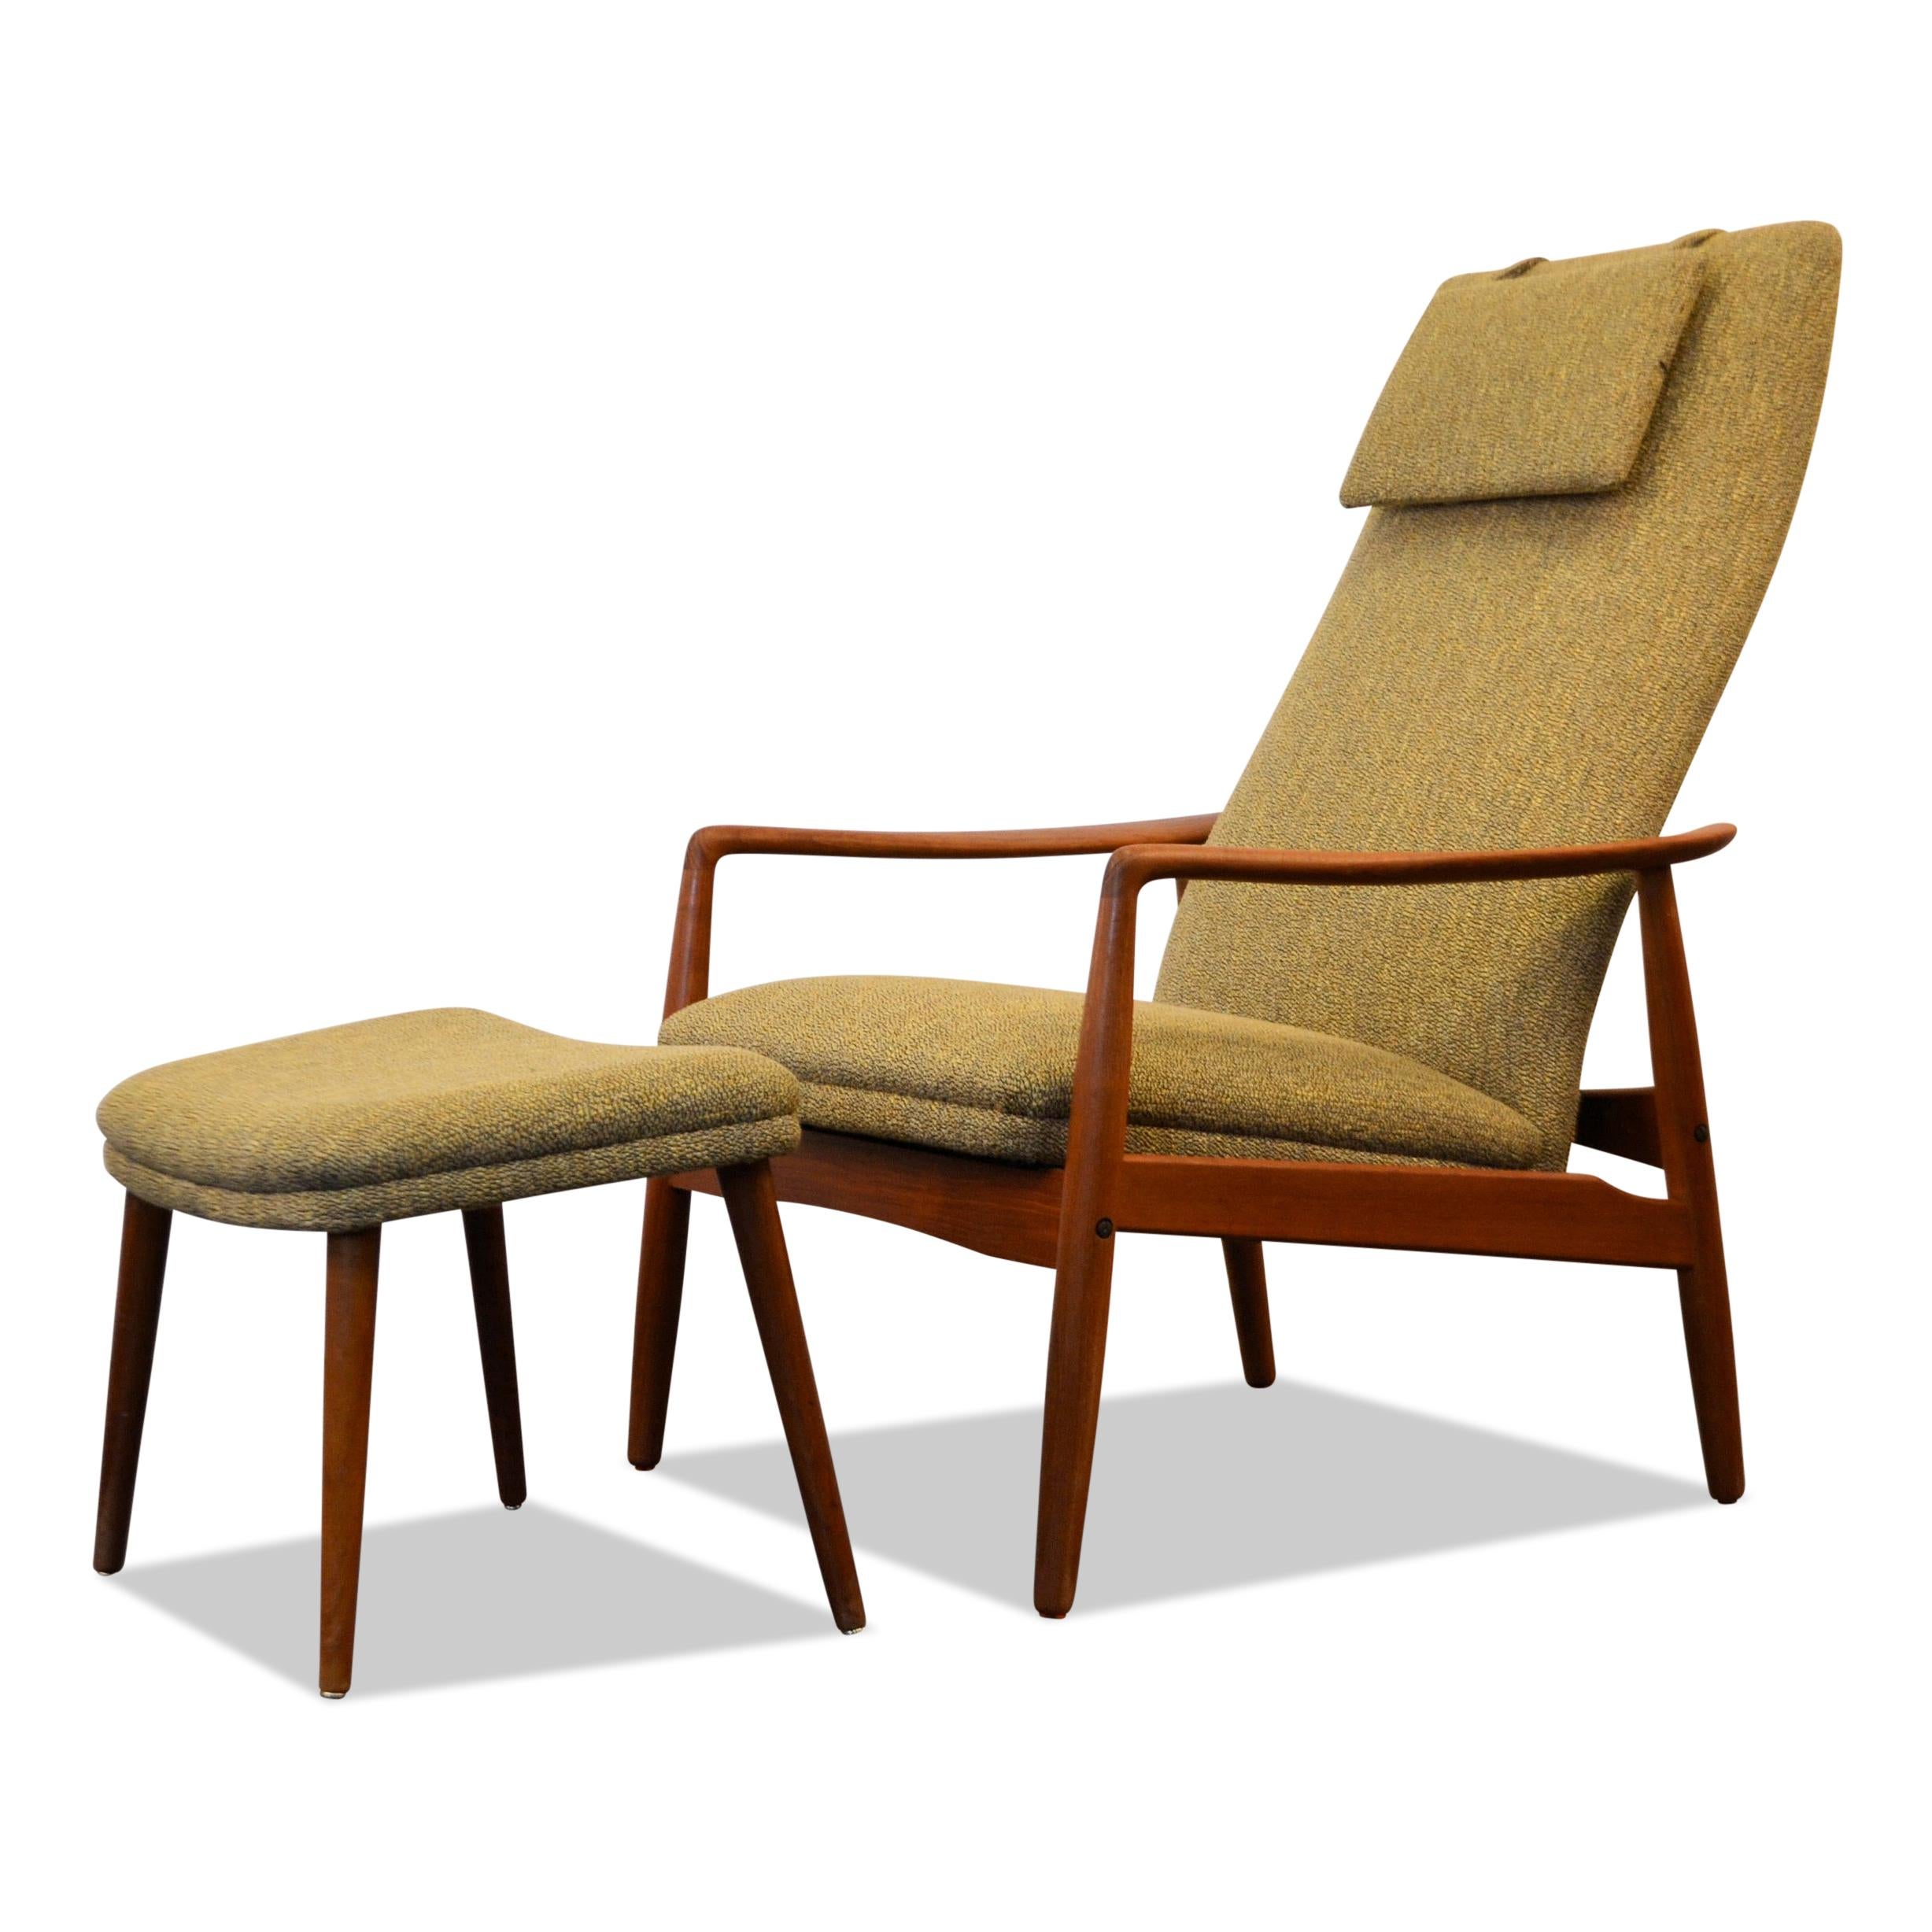 Stylish vintage Danish modern easy chair and ottoman designed by Søren Ladefoged for Danish manufacturer SL Møbler. This comfortable, solid teak chair features the typical midcentury Denmark organic design. The lounge chair and matching ottoman both